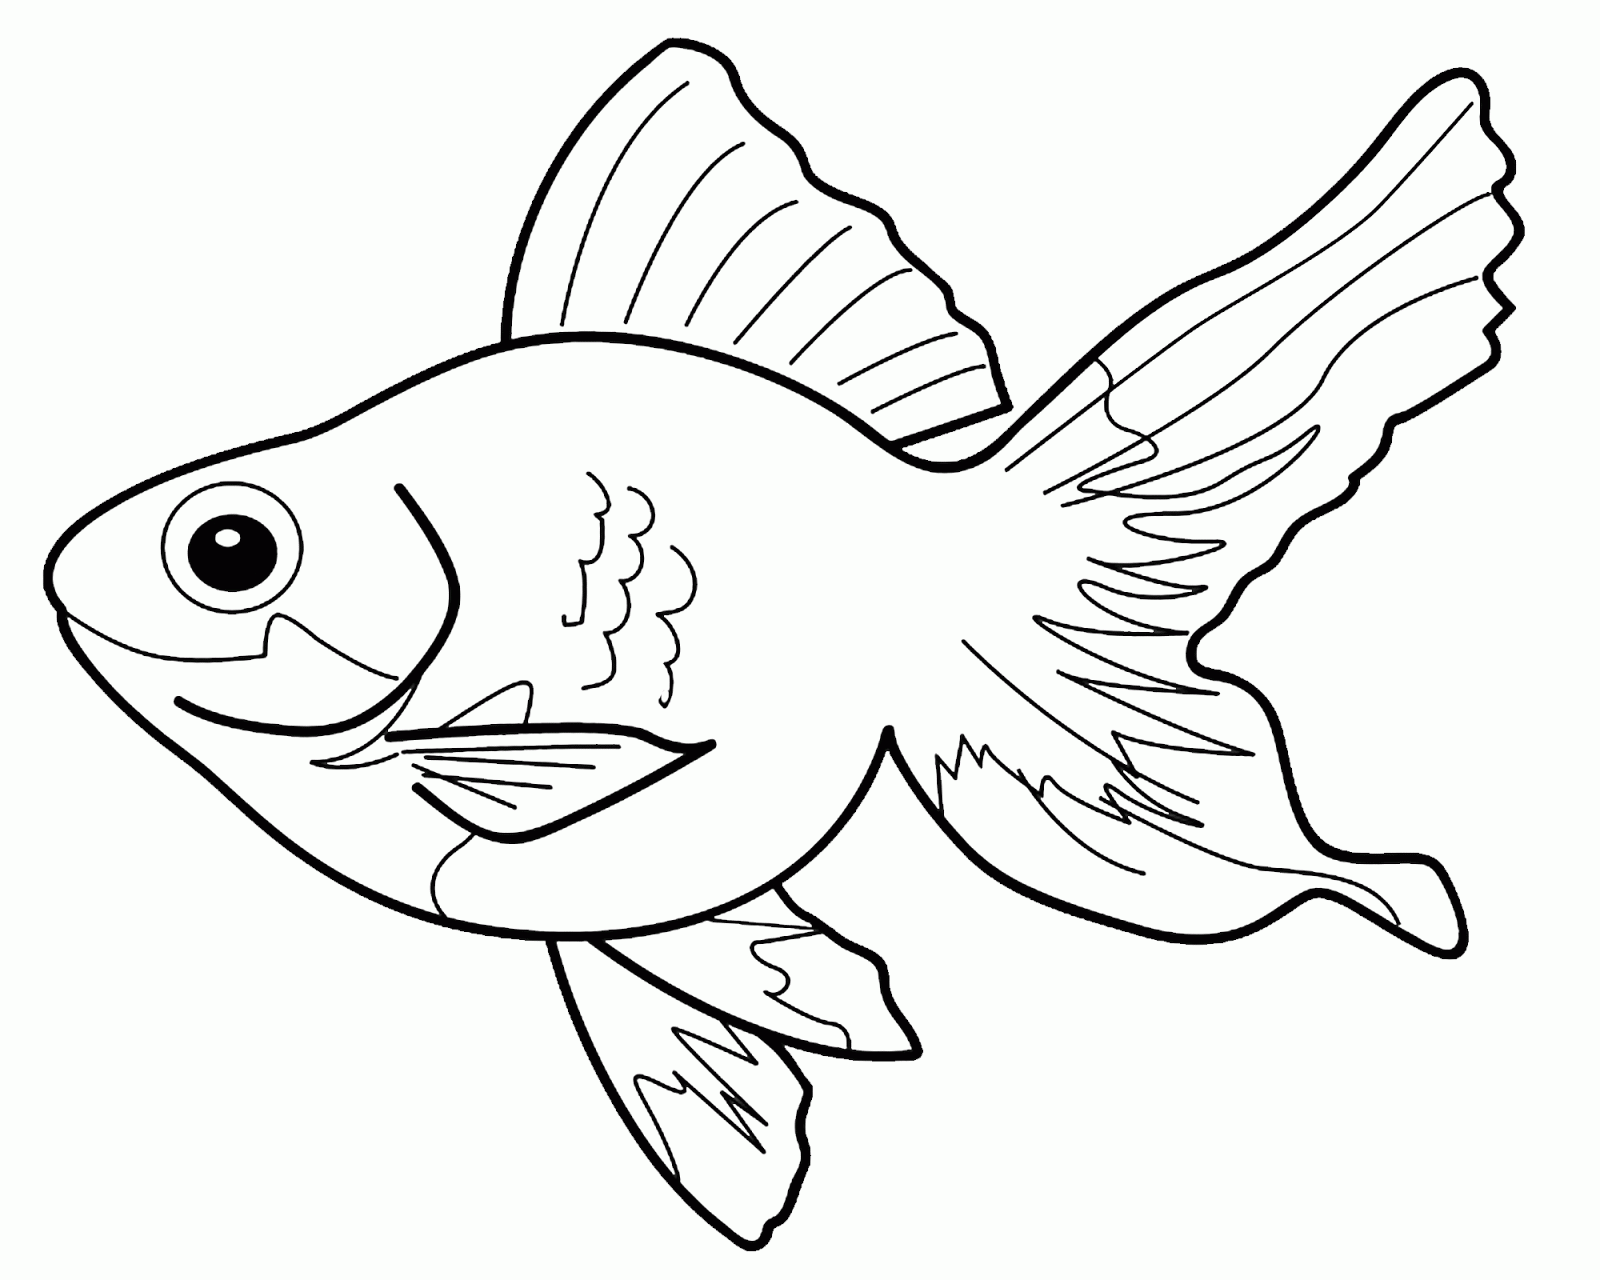 Fish Outline Coloring Pages Animal Fish For Children Printable Coloring4free Coloring4free Com